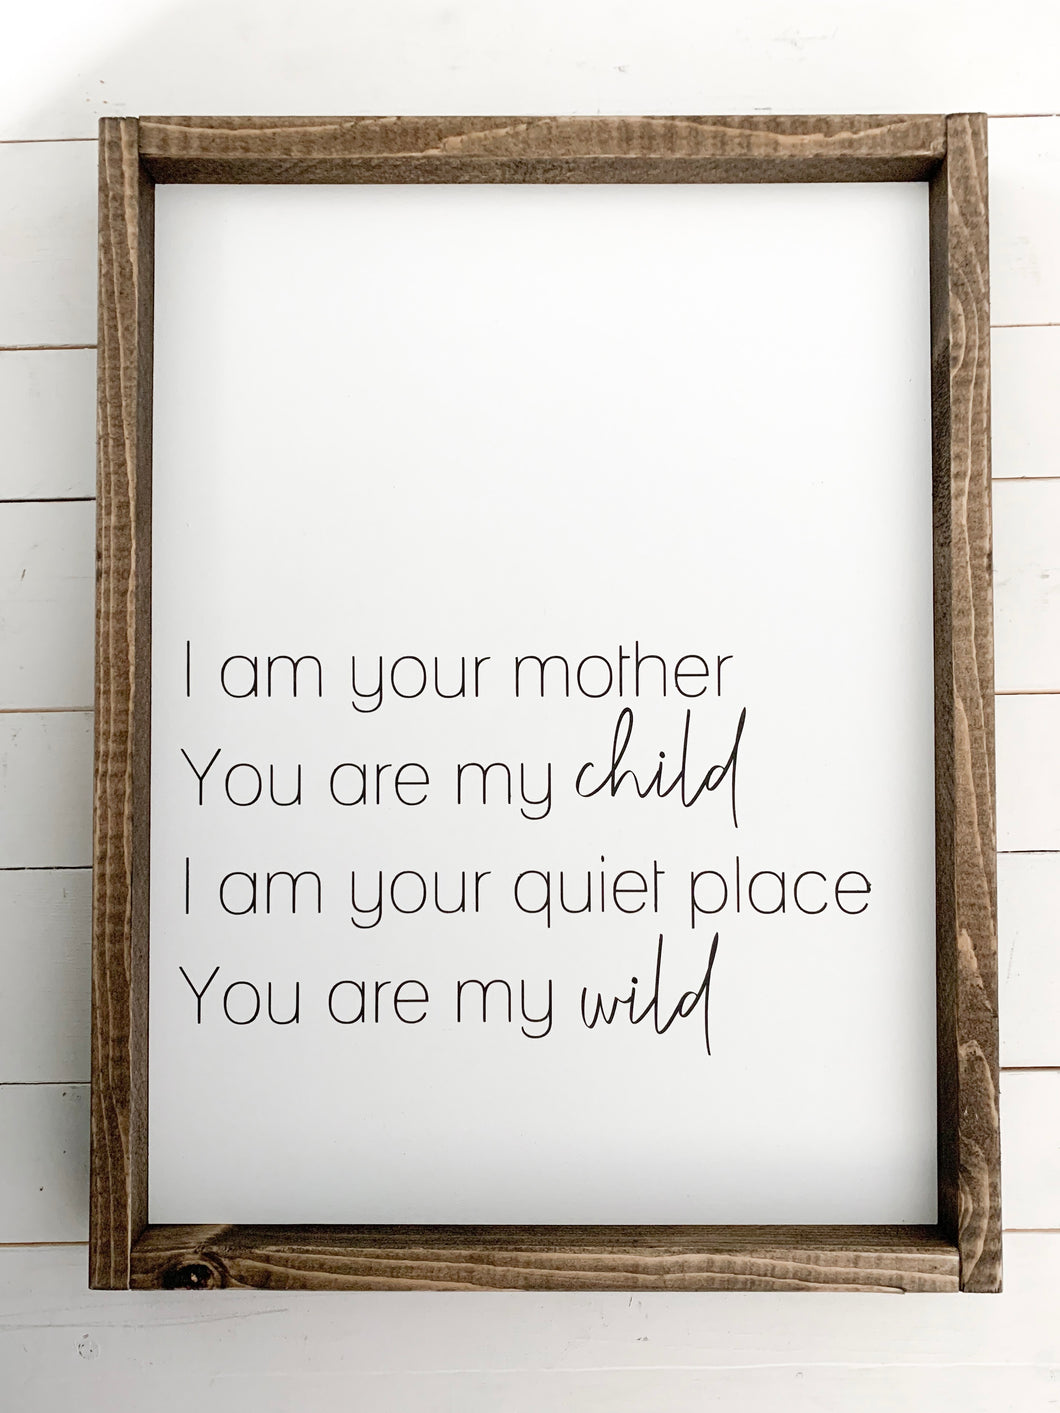 I am your mother